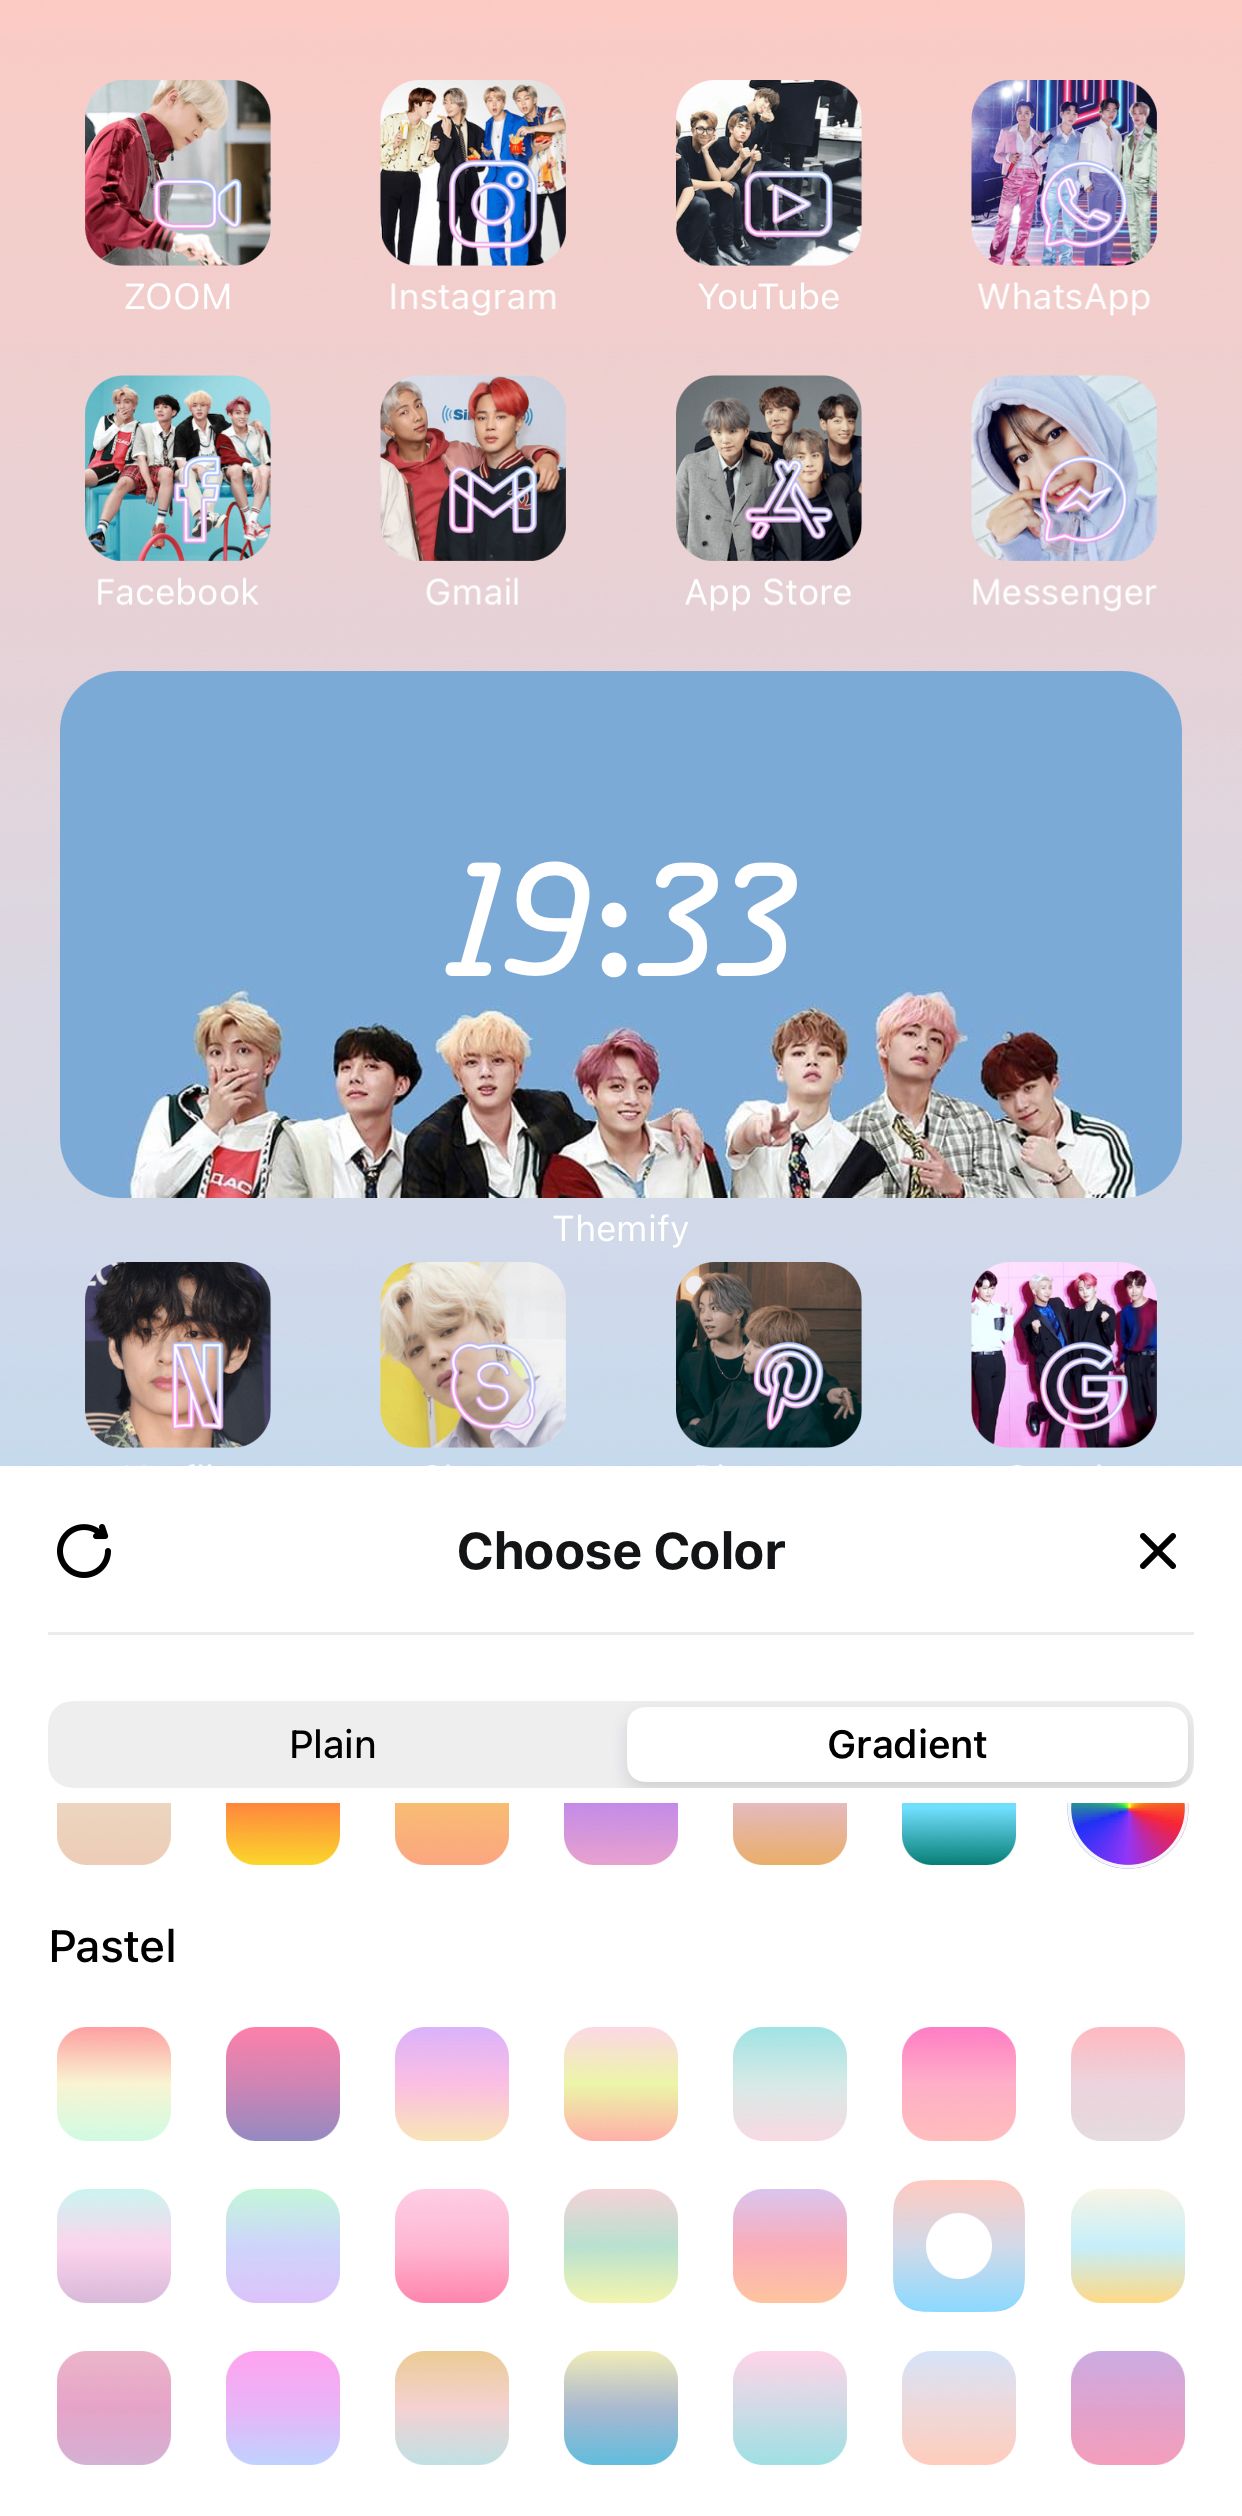 Color swatch gradients for Themify background with BTS icons and widget